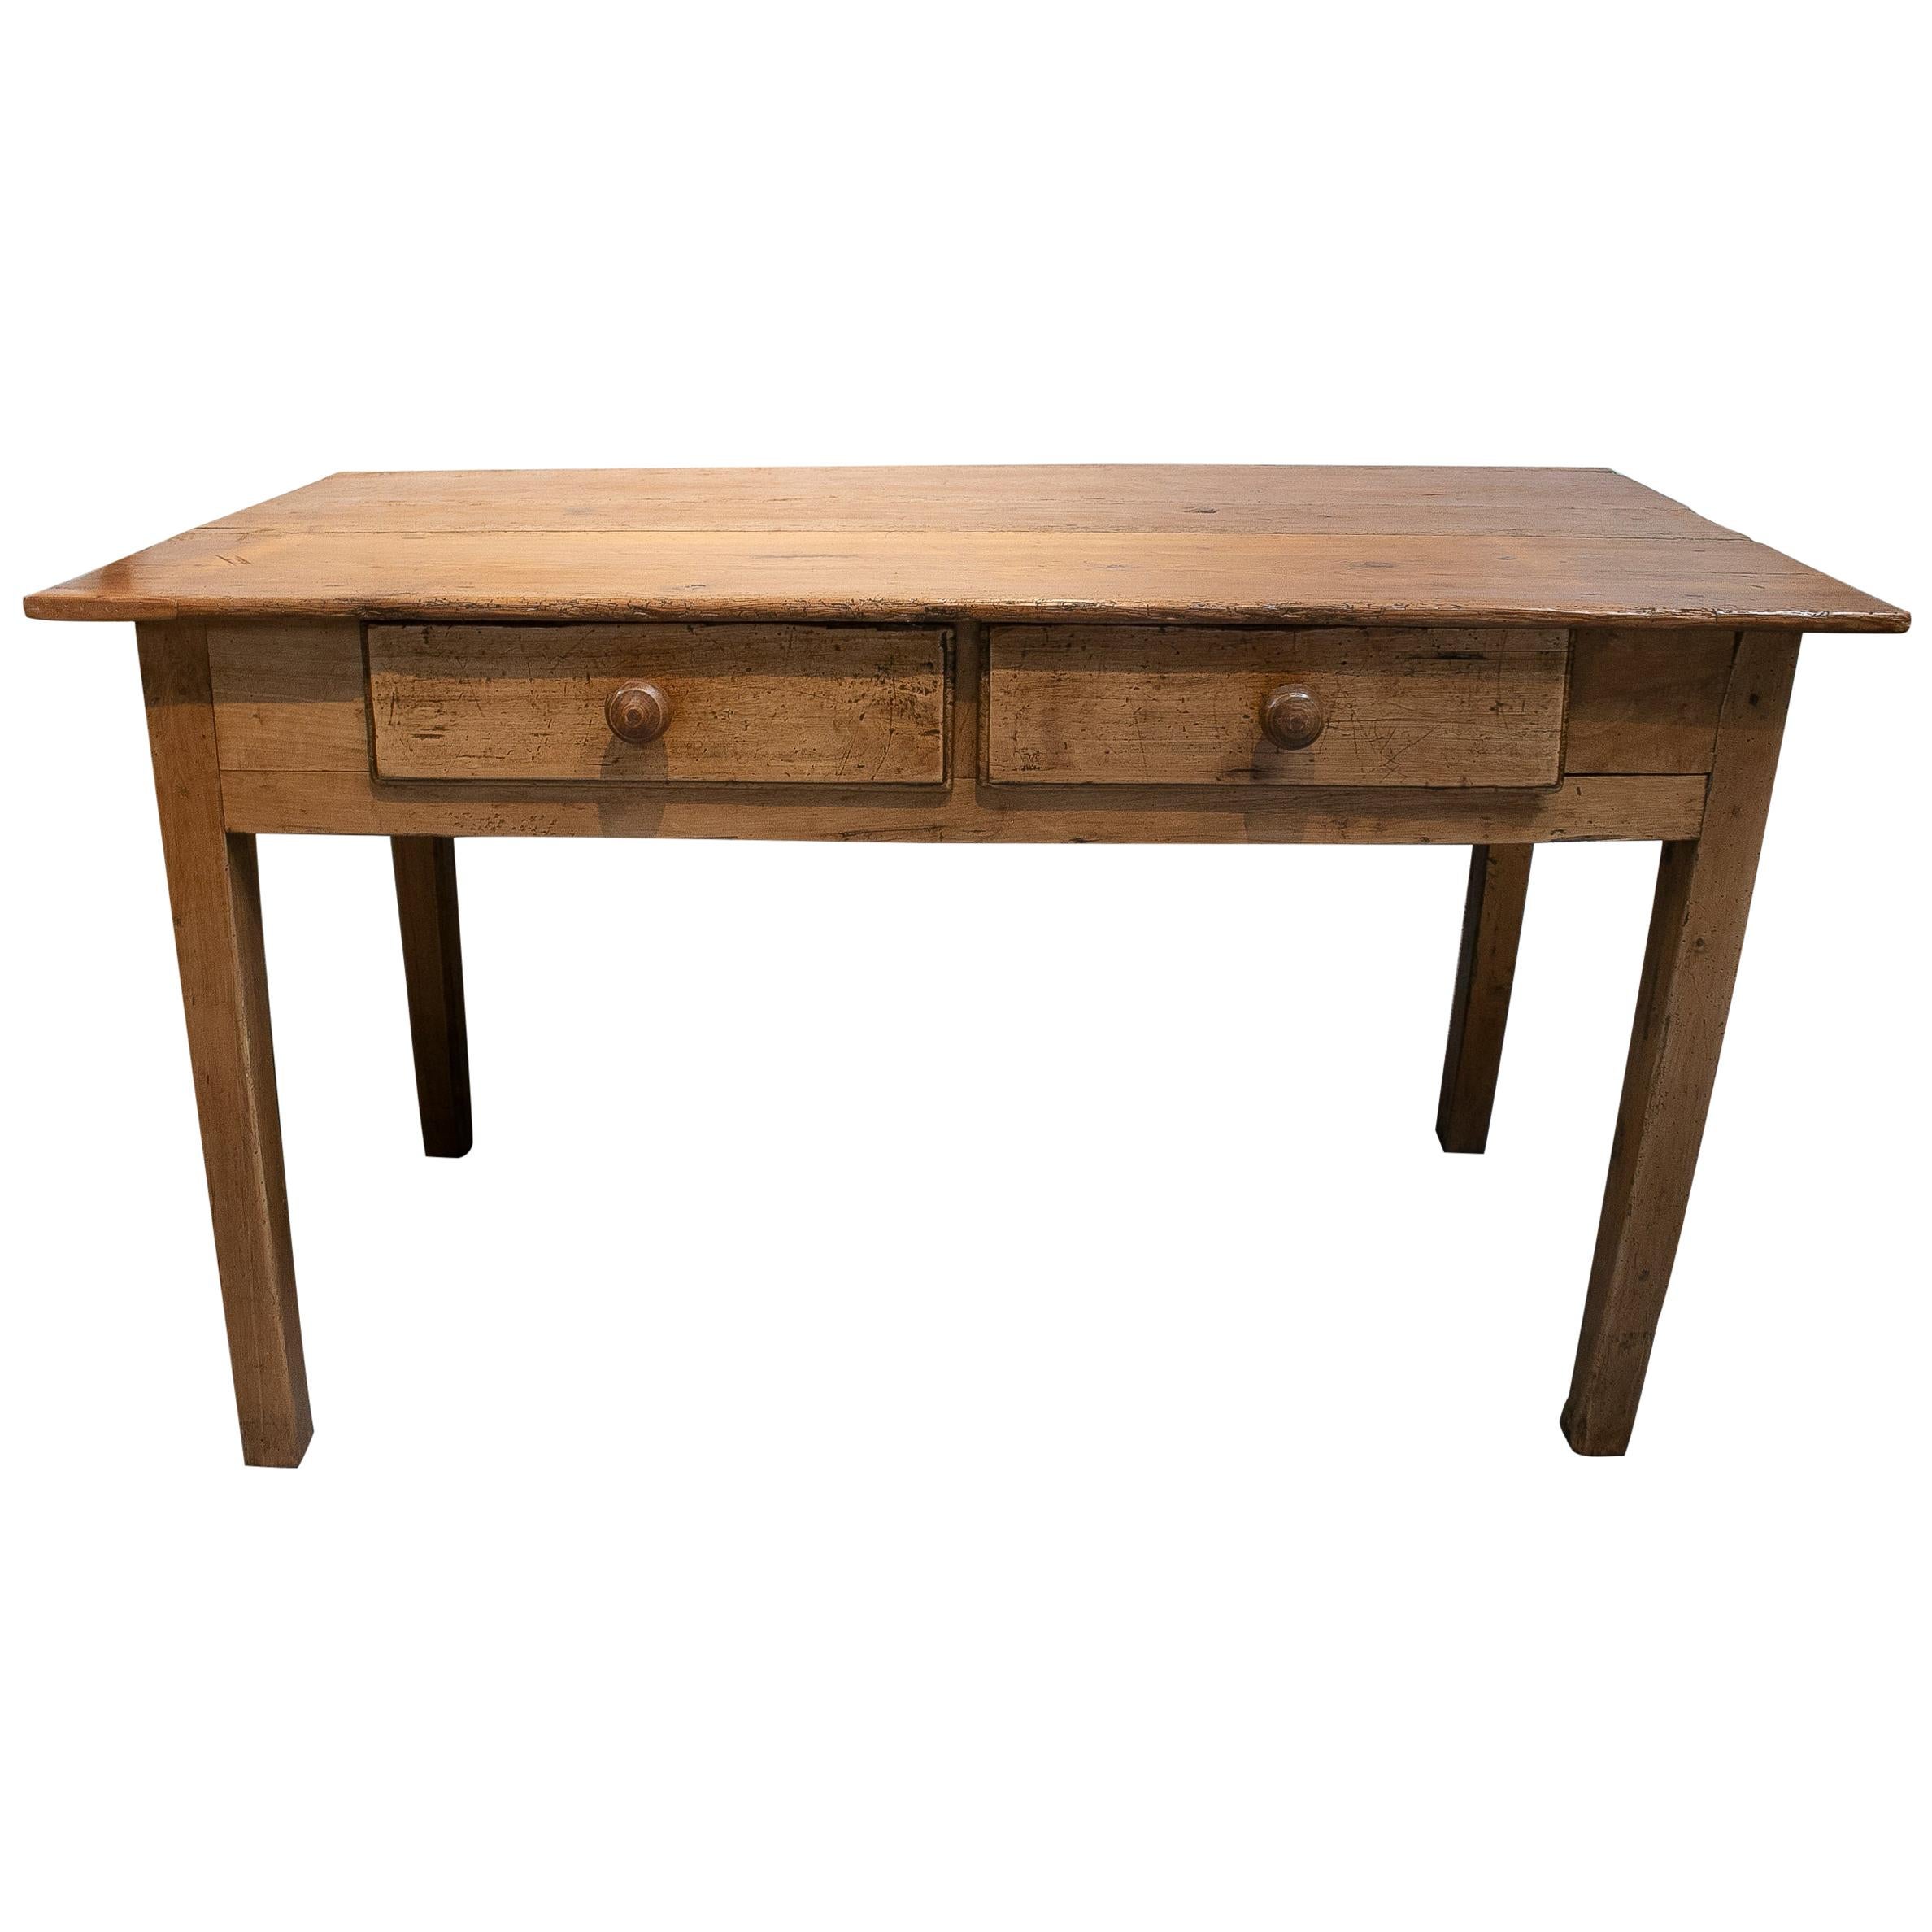 Rustic 1920s Spanish Two-Drawer Lime Washed Pine Wood Farmhouse Table